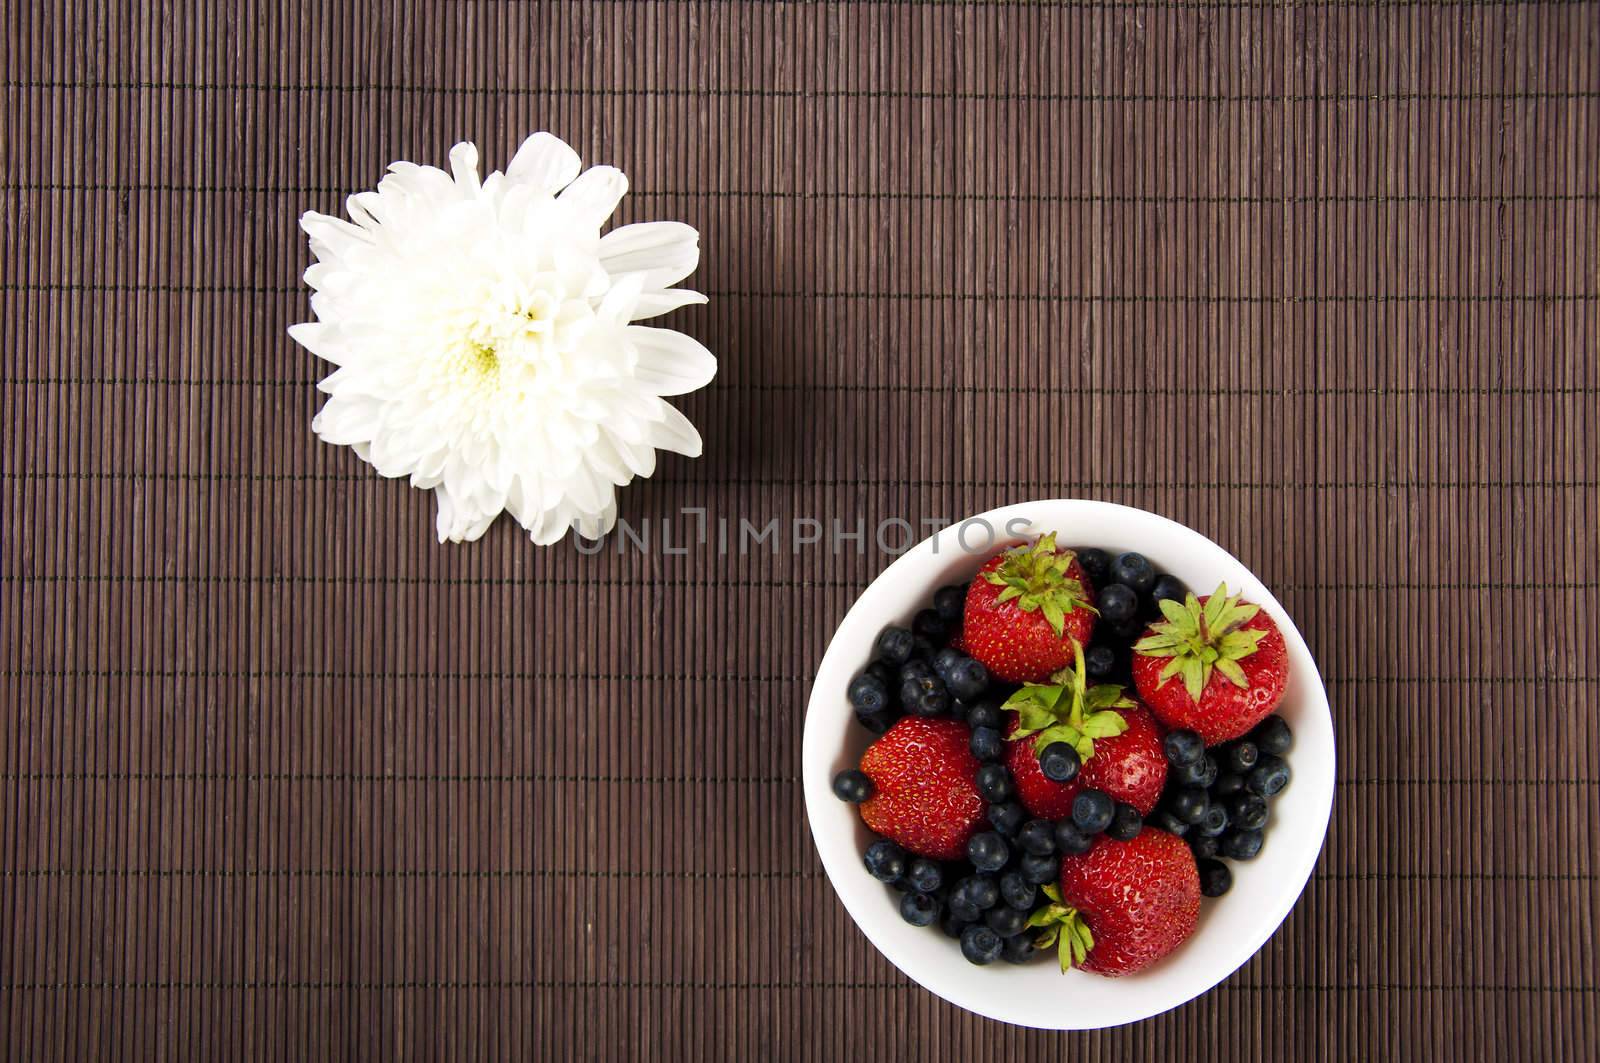 light Breakfast flower and Berries on a table by adam121